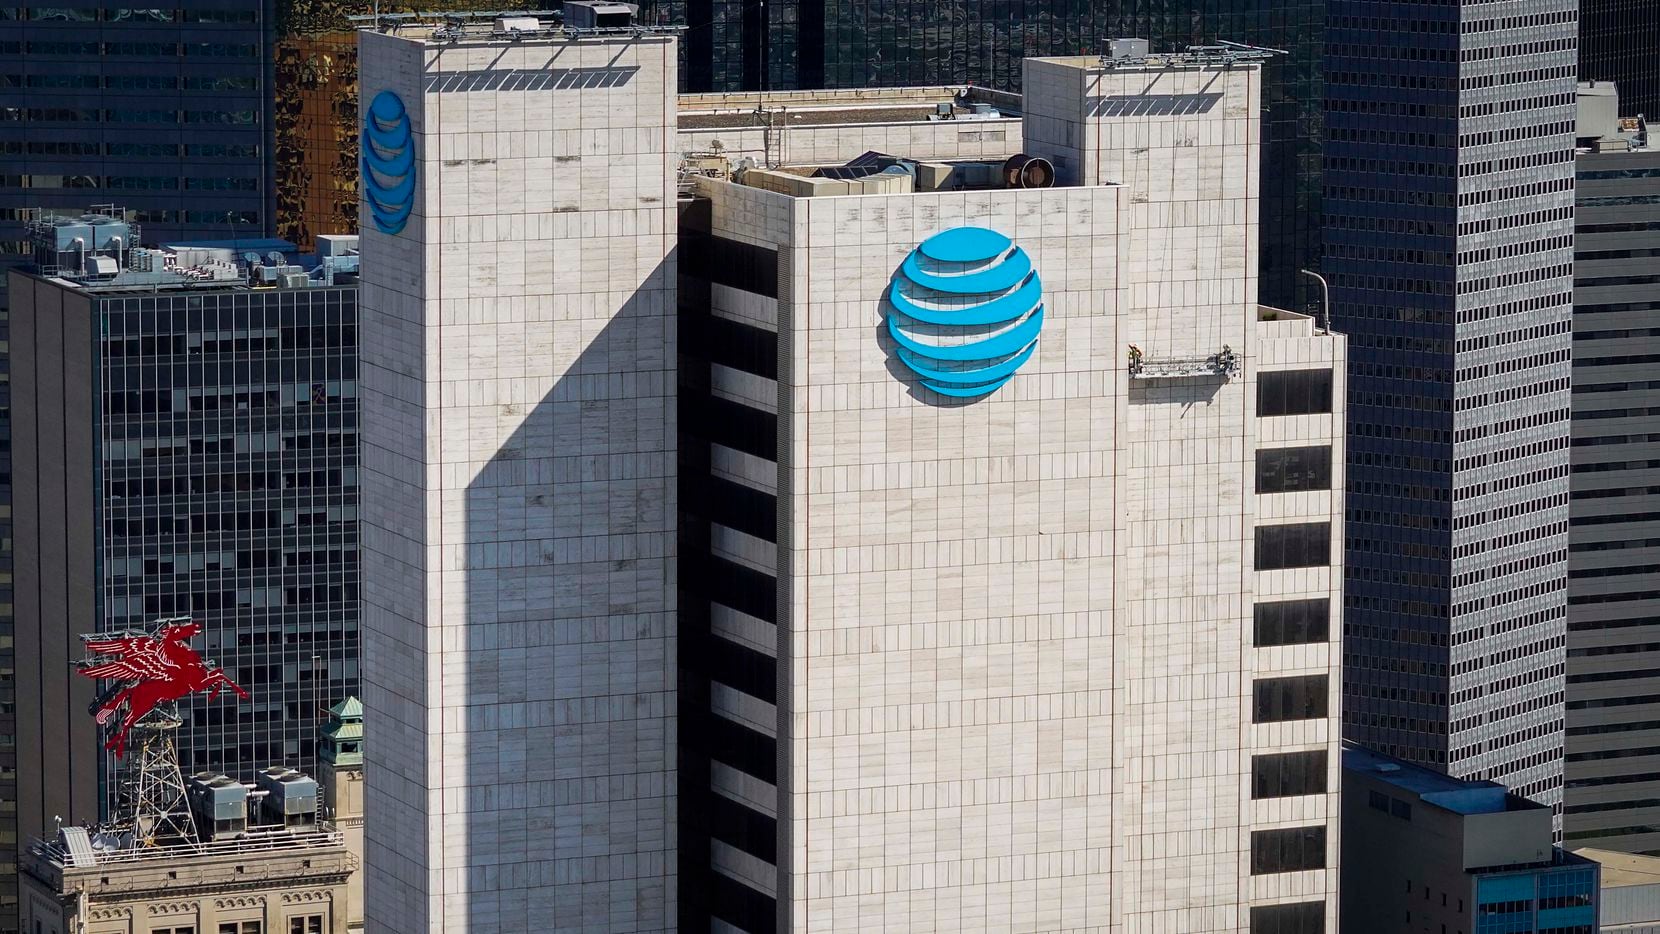 Aerial view of Whitacre Tower, also known as One AT&T Plaza, AT&T's corporate headquarters...